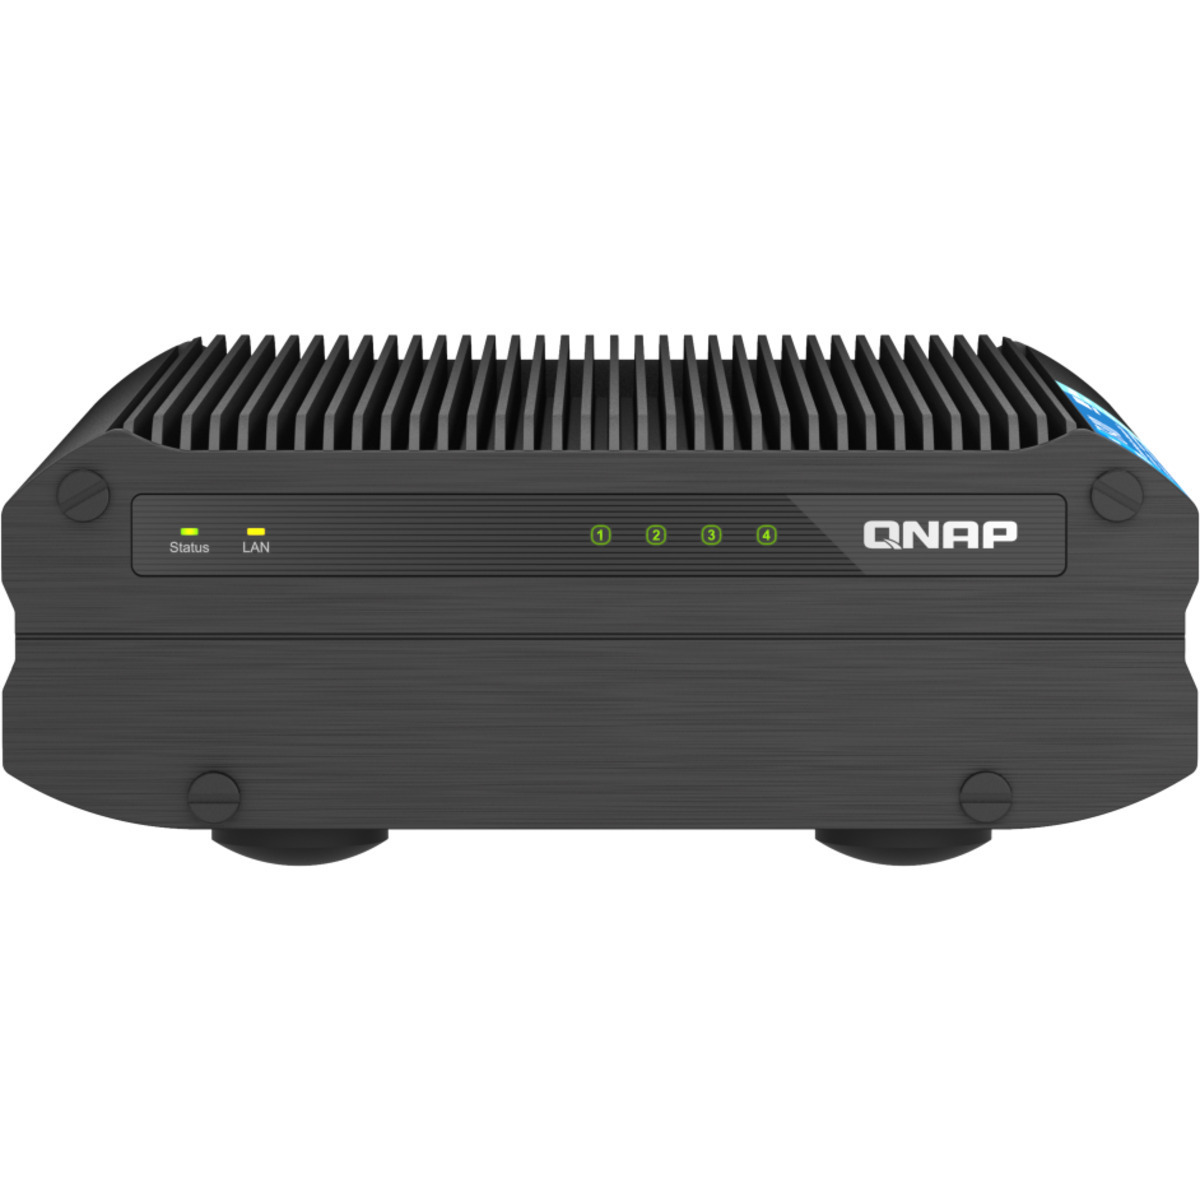 QNAP TS-i410X 24tb 4-Bay Desktop Multimedia / Power User / Business NAS - Network Attached Storage Device 3x8tb TeamGroup EX2 Elite T253E2008T0C101 2.5 550/520MB/s SATA 6Gb/s SSD CONSUMER Class Drives Installed - Burn-In Tested TS-i410X